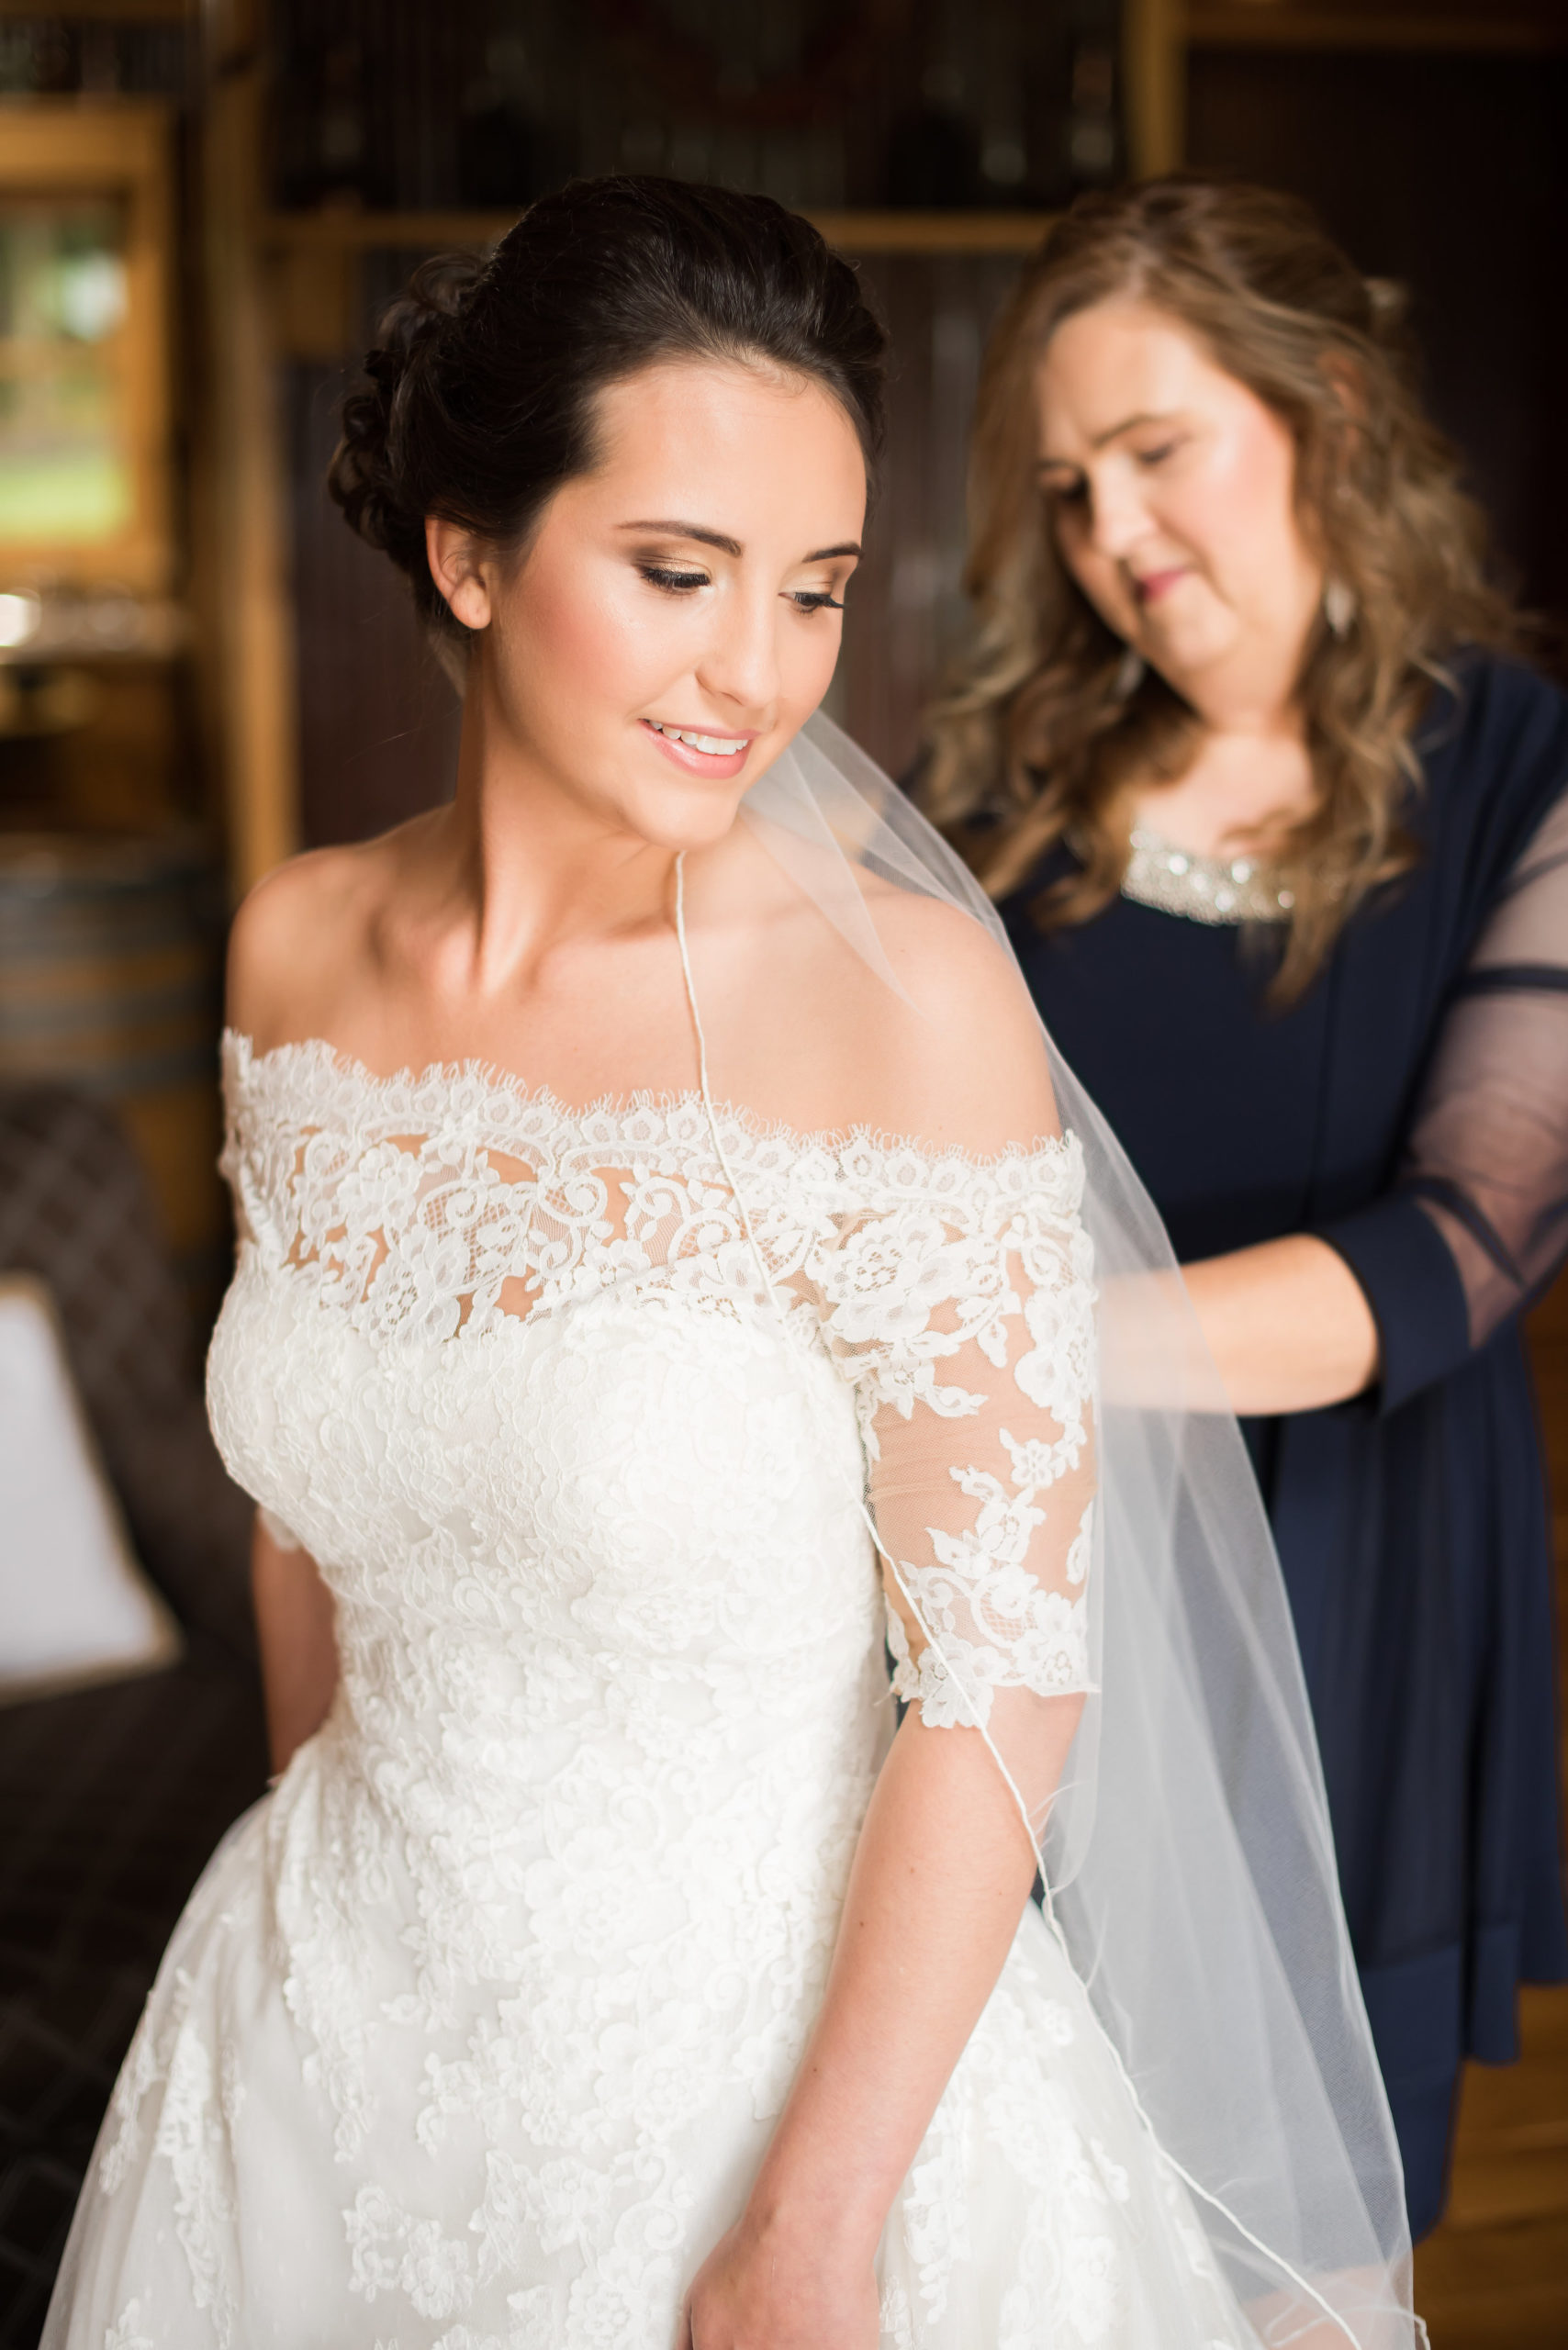 Timeless Love NC Wedding | Dusty Blue rustic elegant wedding | bride getting ready with mother of the bride